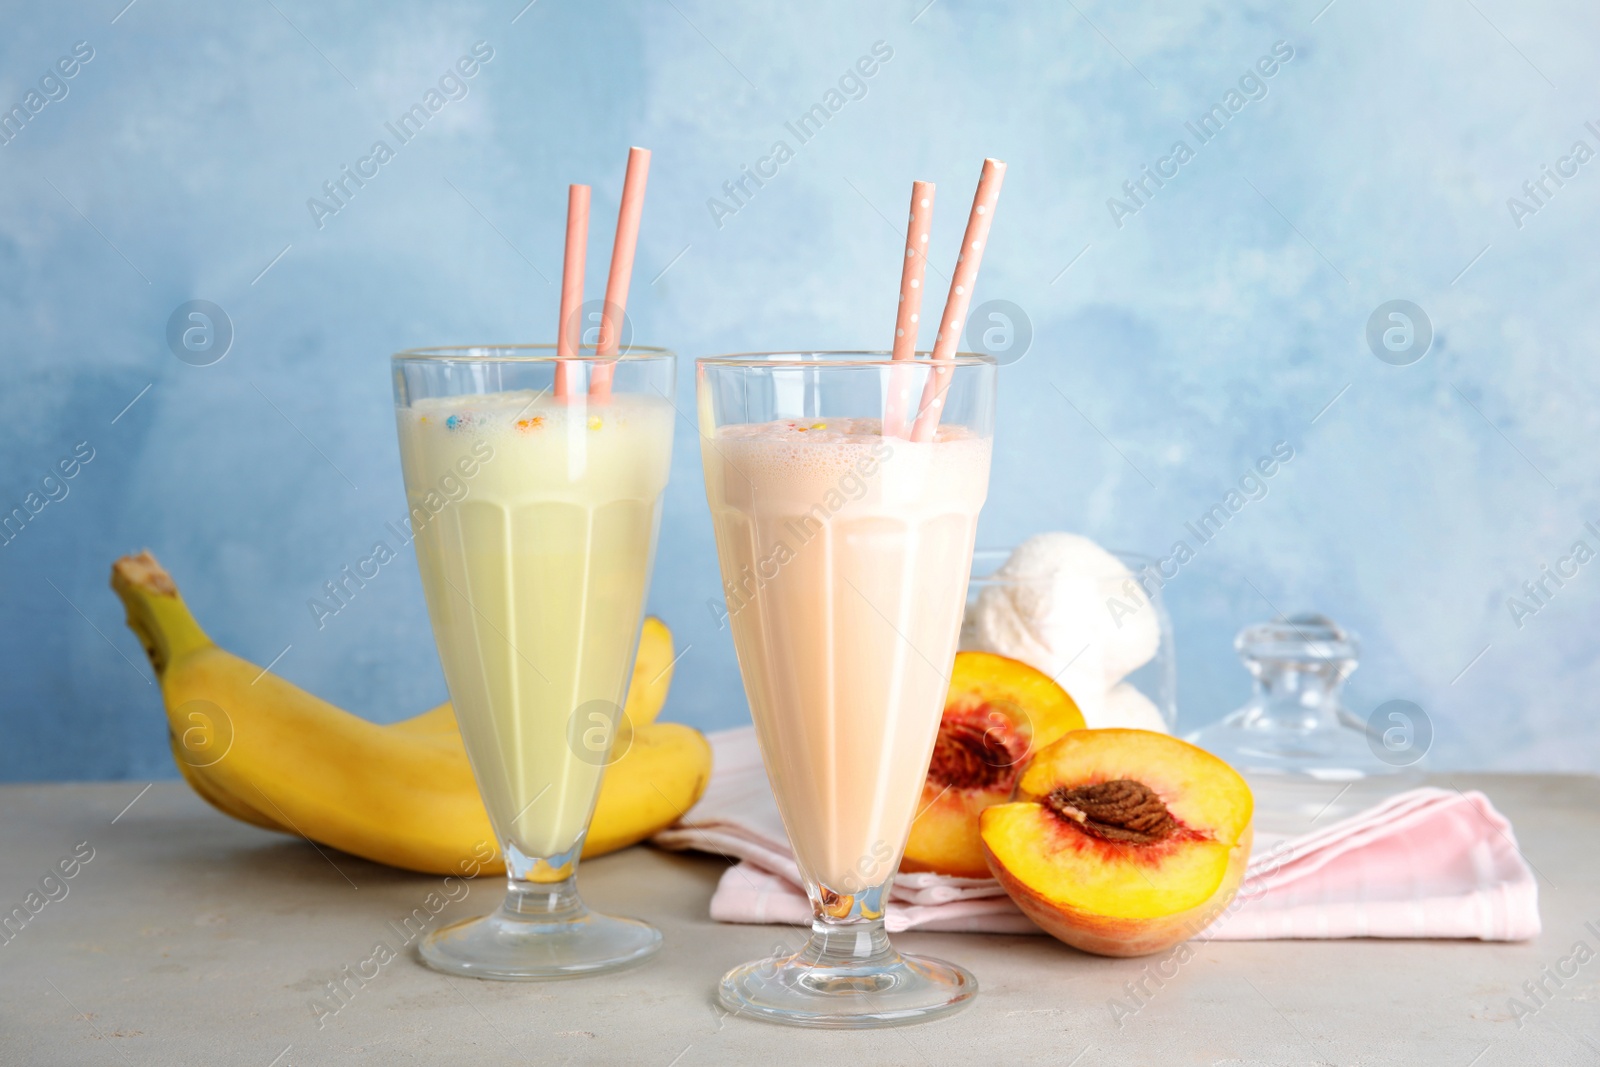 Photo of Delicious milk shakes and ingredients on table against color background